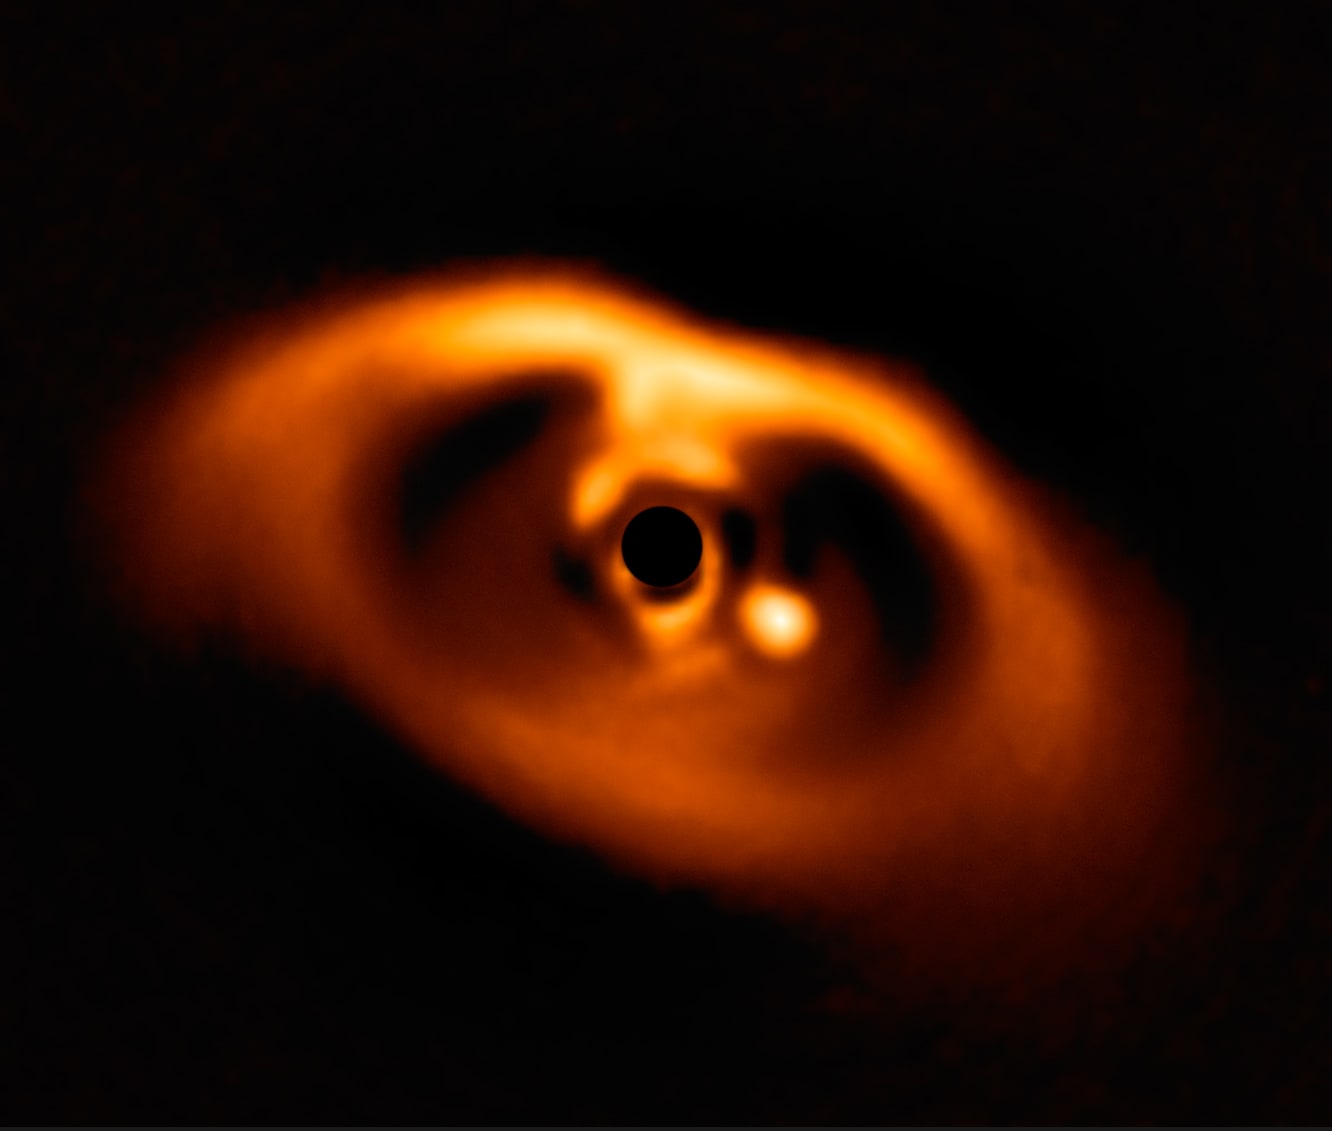 Giant telescope captures first image of a newborn planet